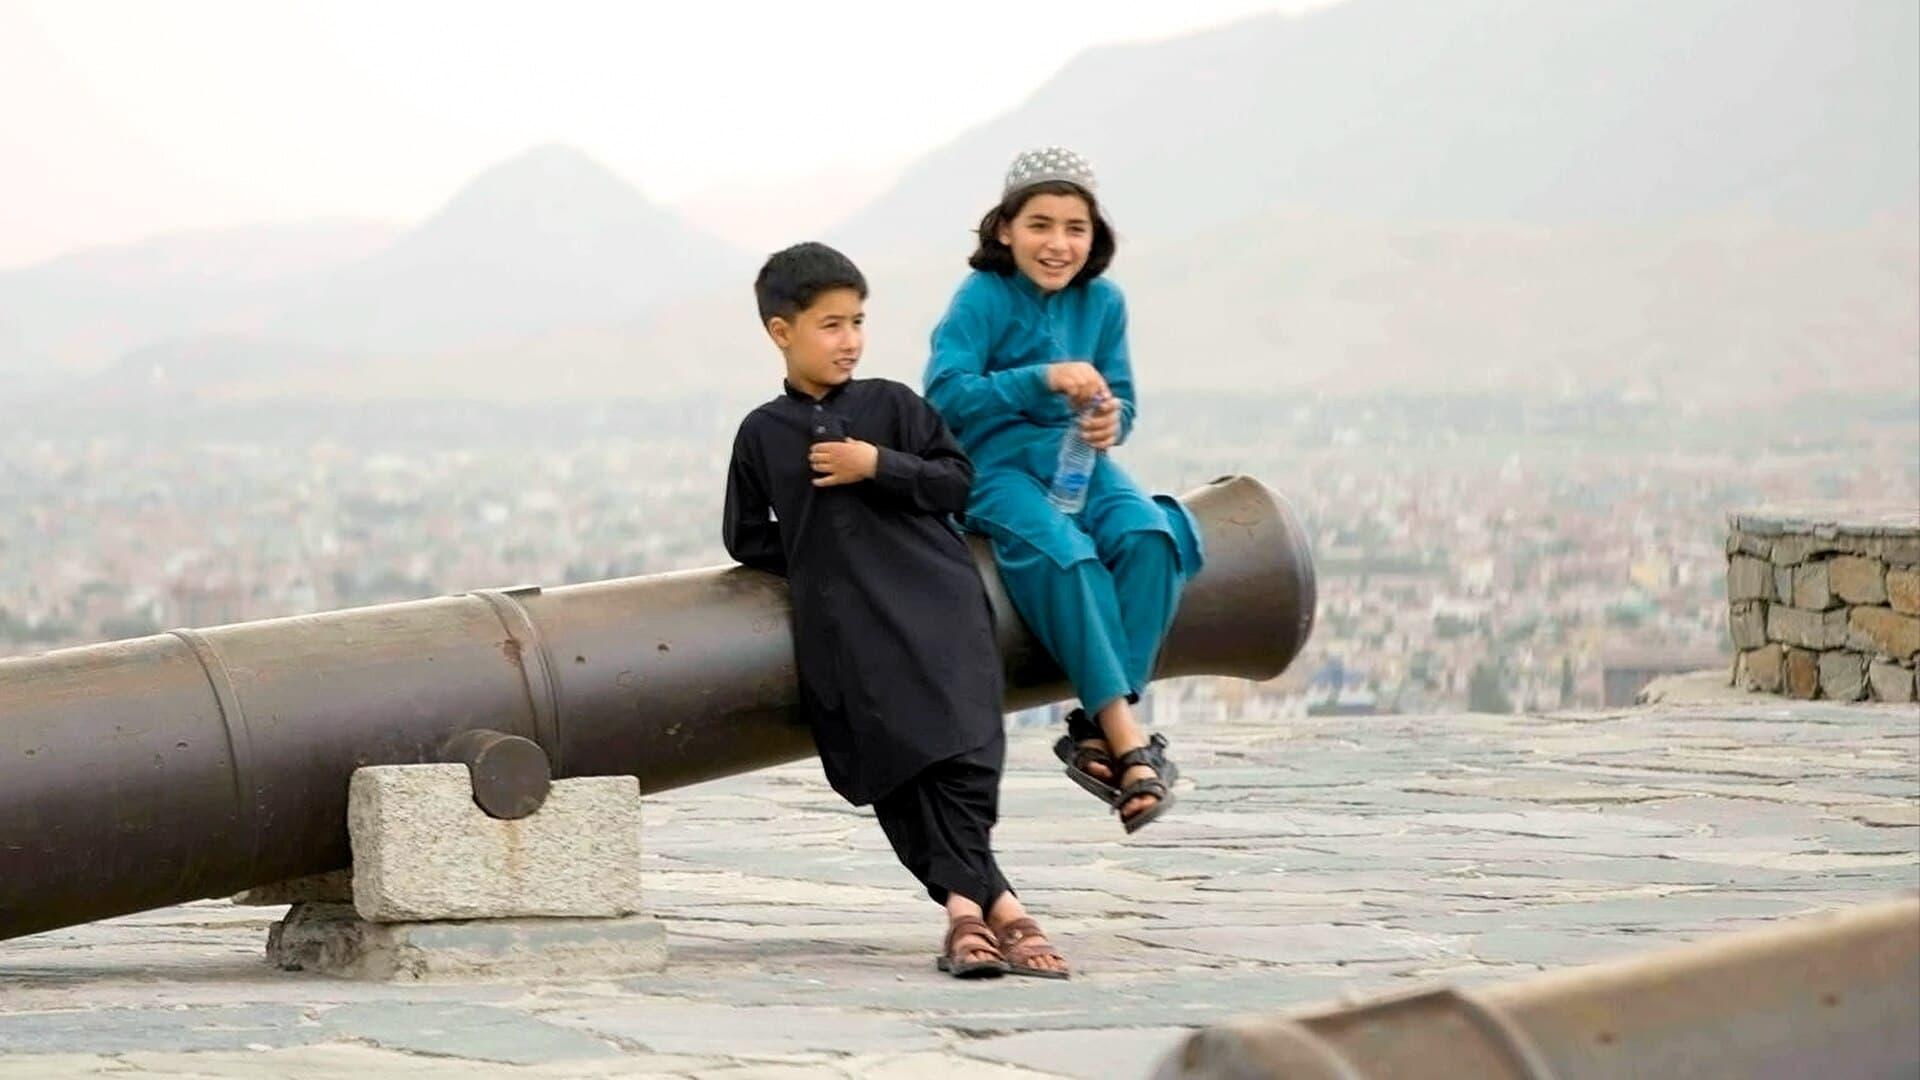 Children of the Taliban backdrop